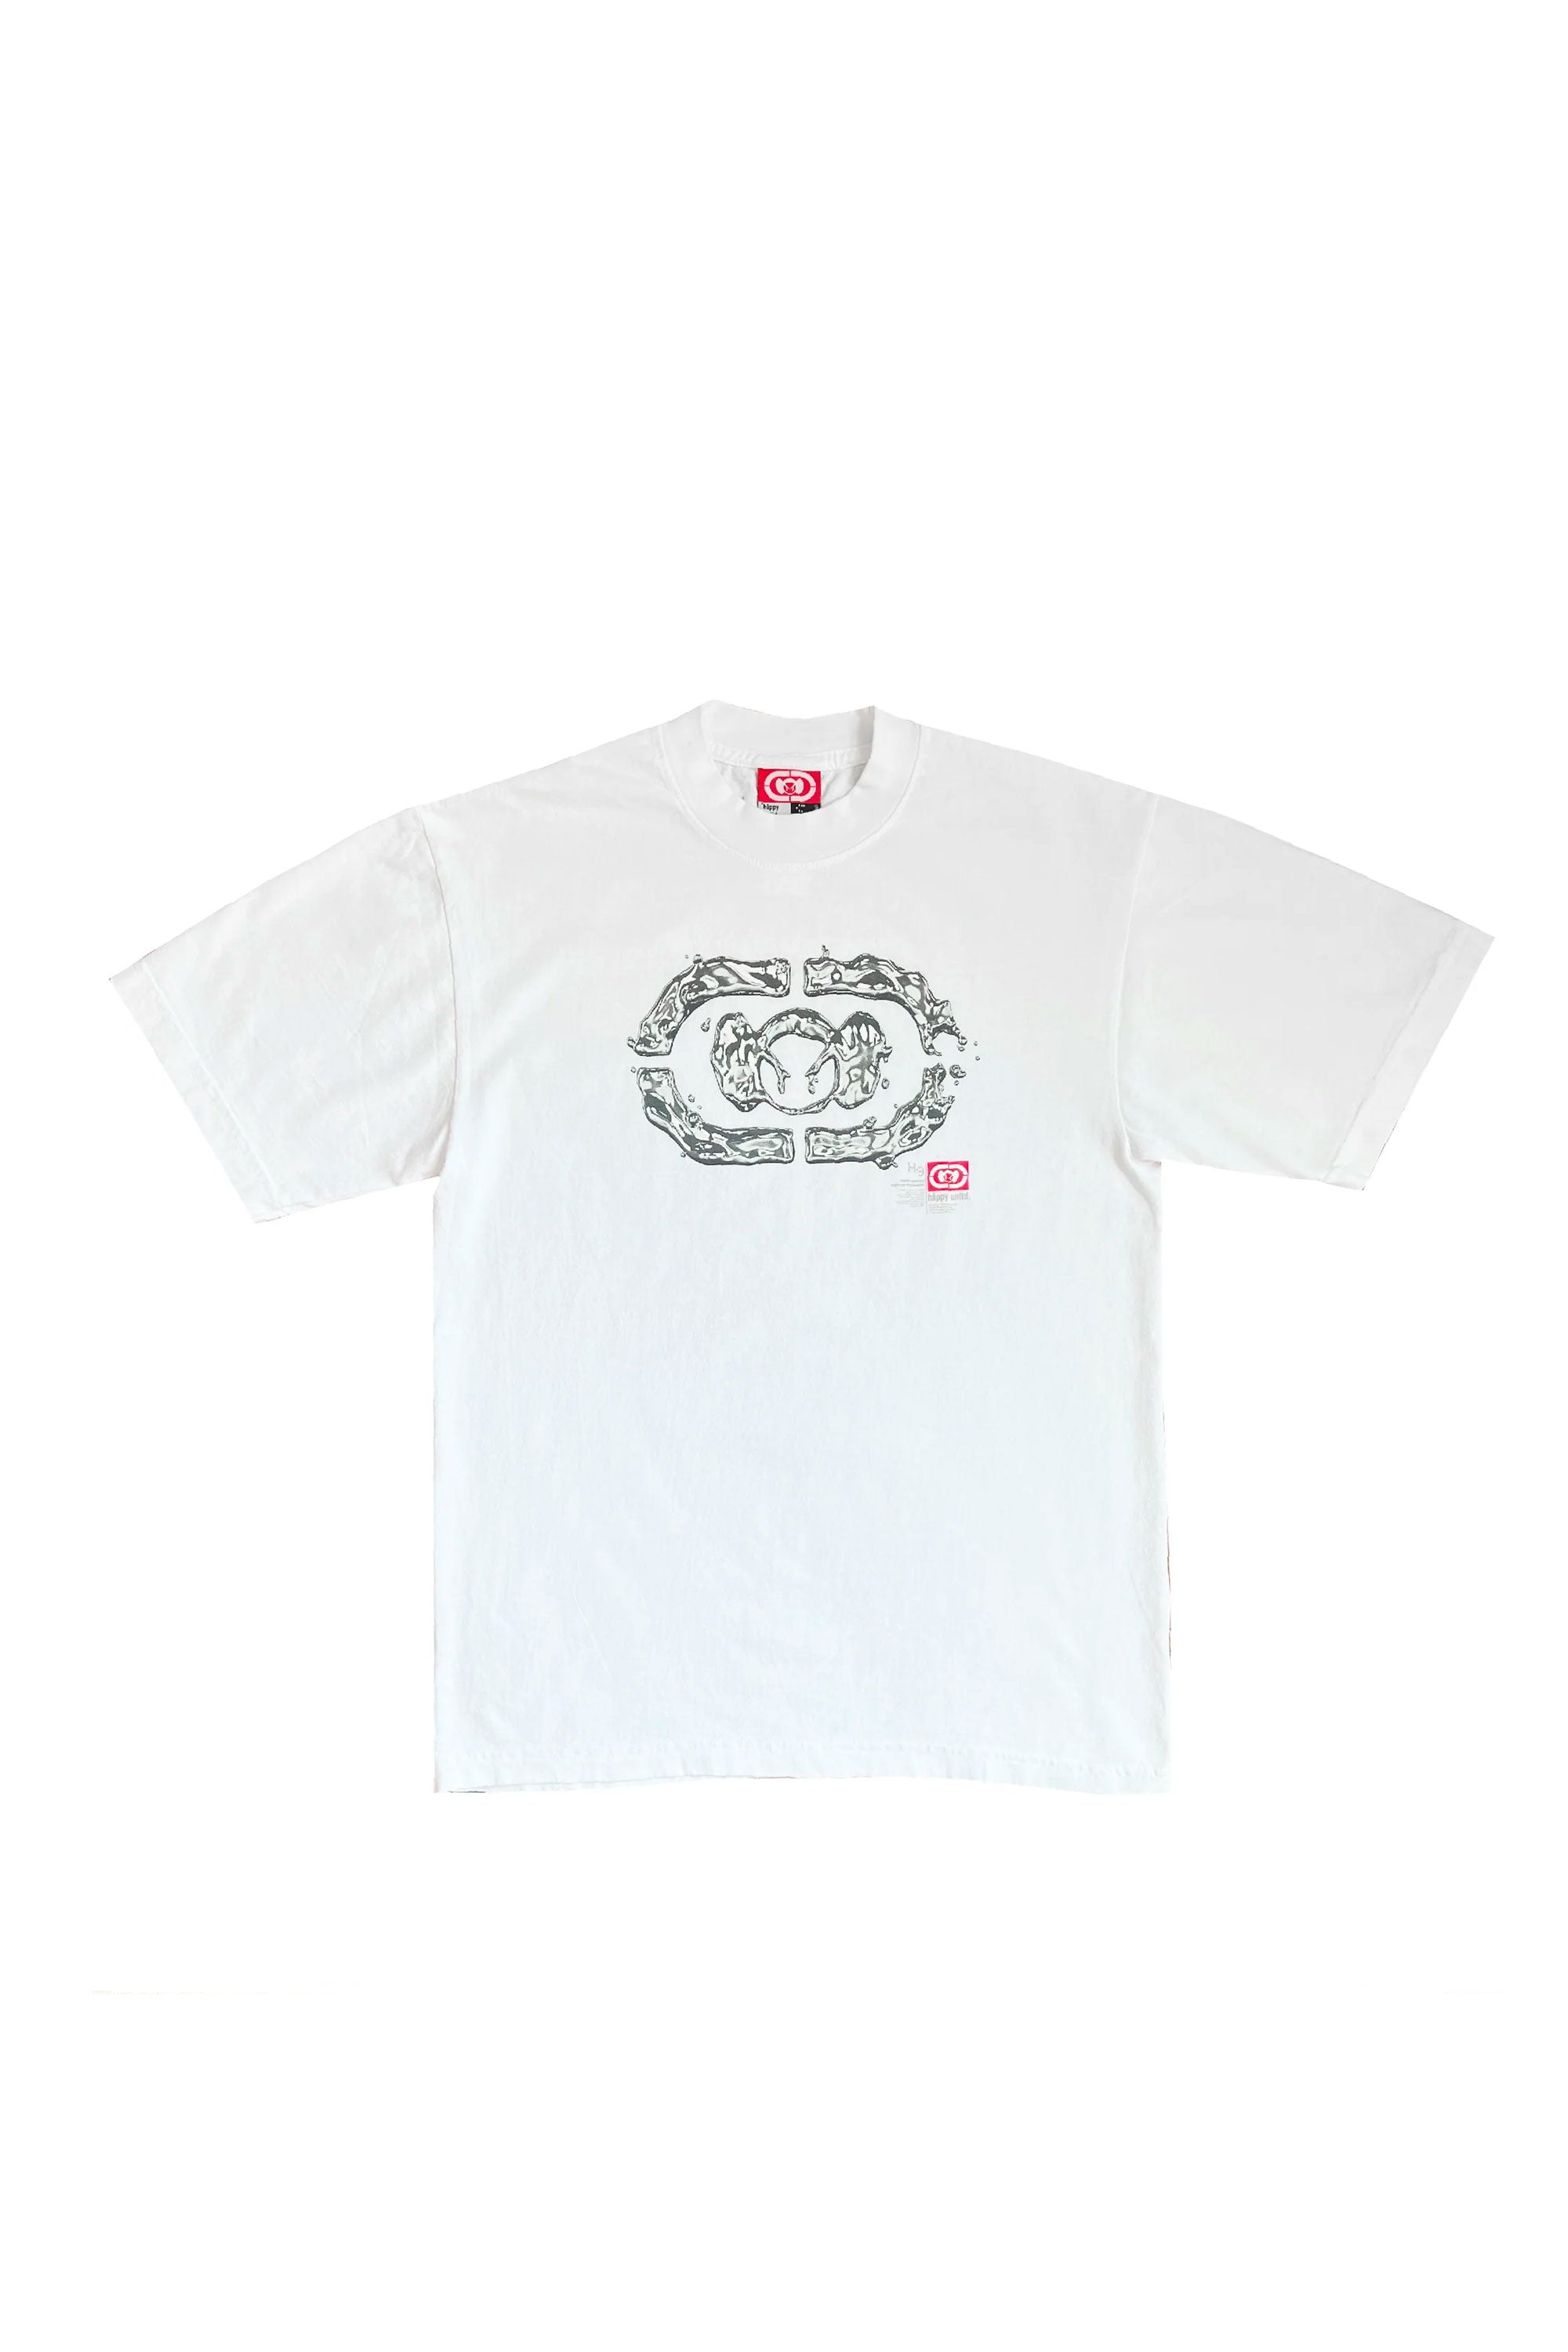 The HAPPY 99 - LIQUID MERCURY TEE WHITE available online with global shipping, and in PAM Stores Melbourne and Sydney.